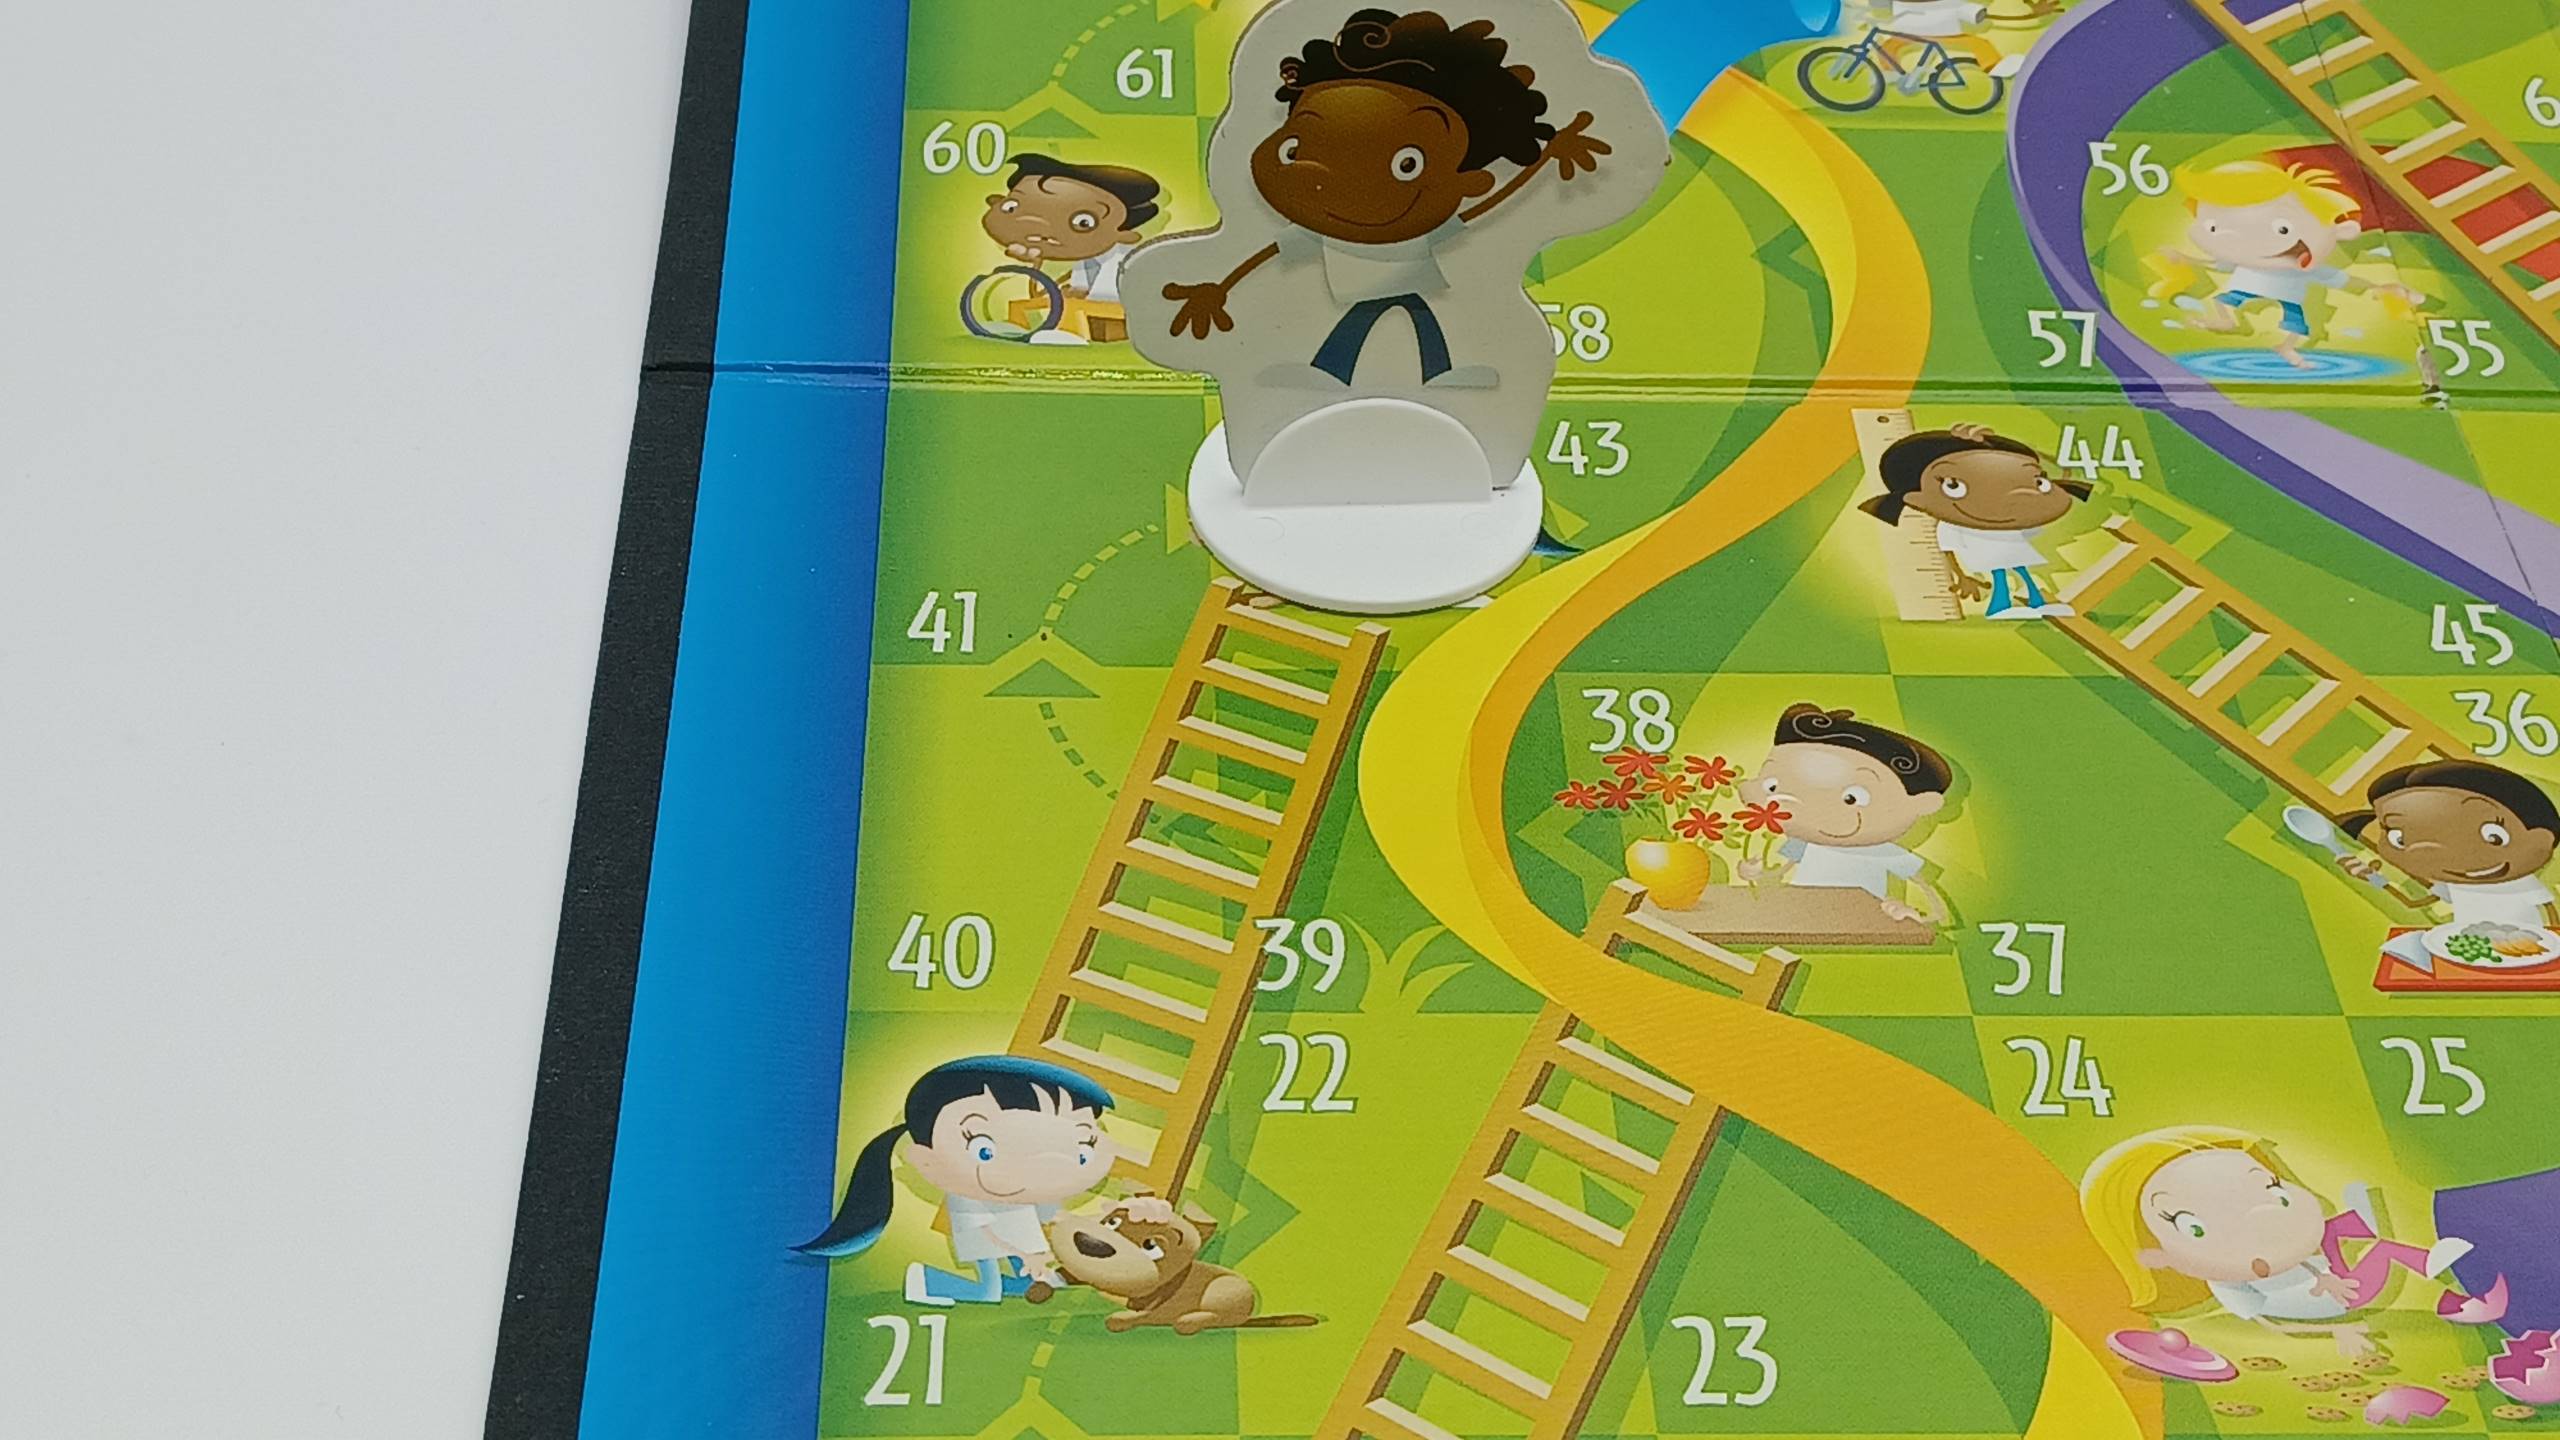 chutes and ladders with ludo rules